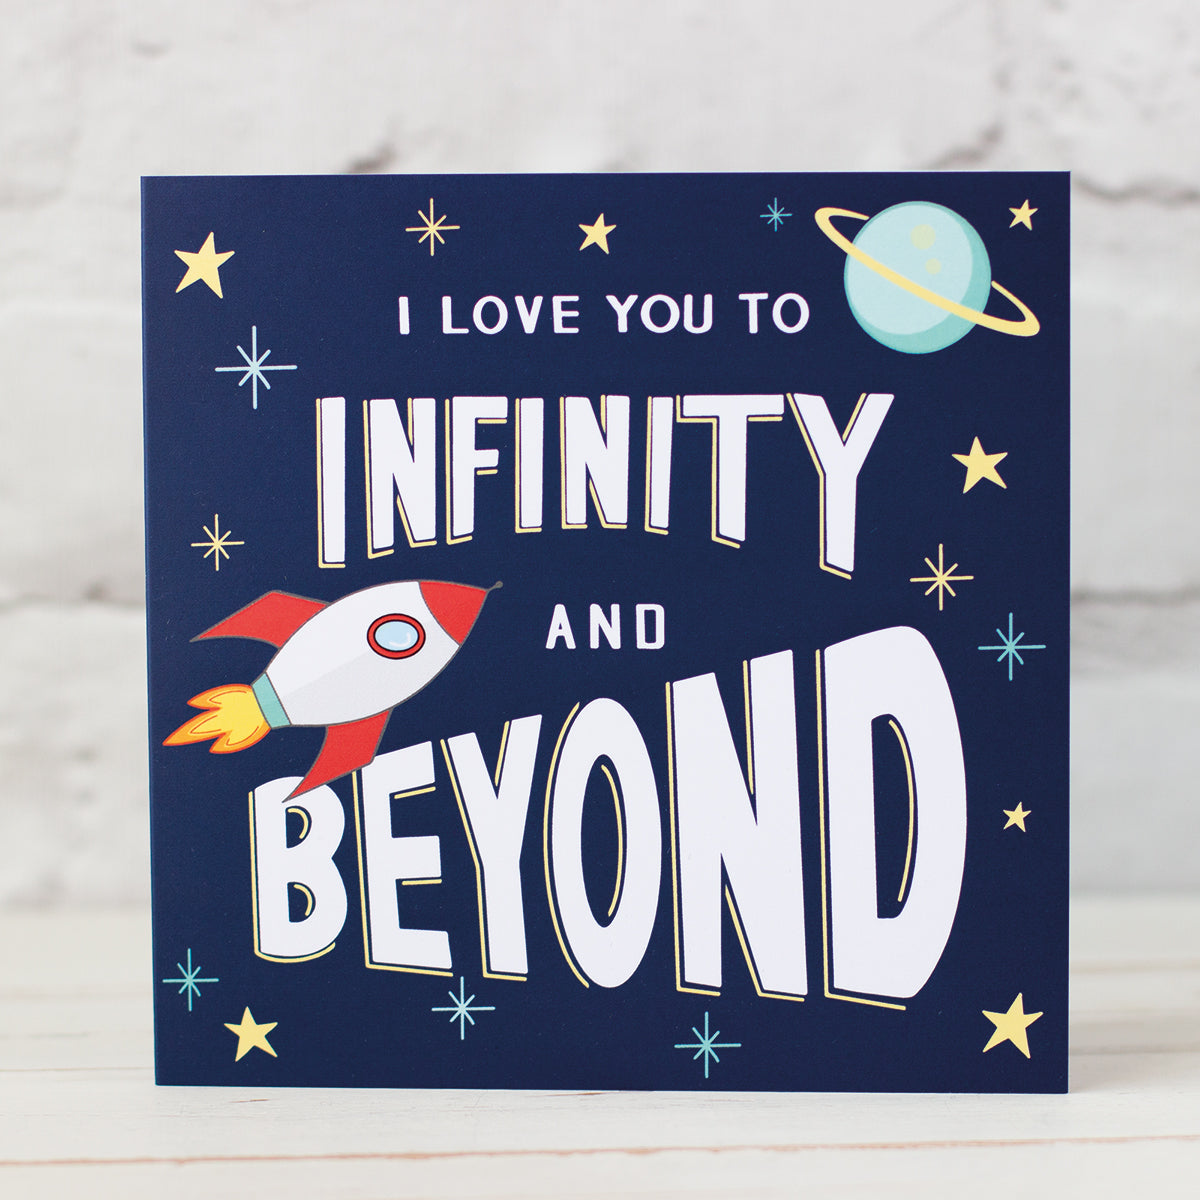 Space themed Valentines, anniversary card. Dark Blue Background white lettering "I Love You to Infinity and Beyond, Design uncludes spaceship, stars and planet